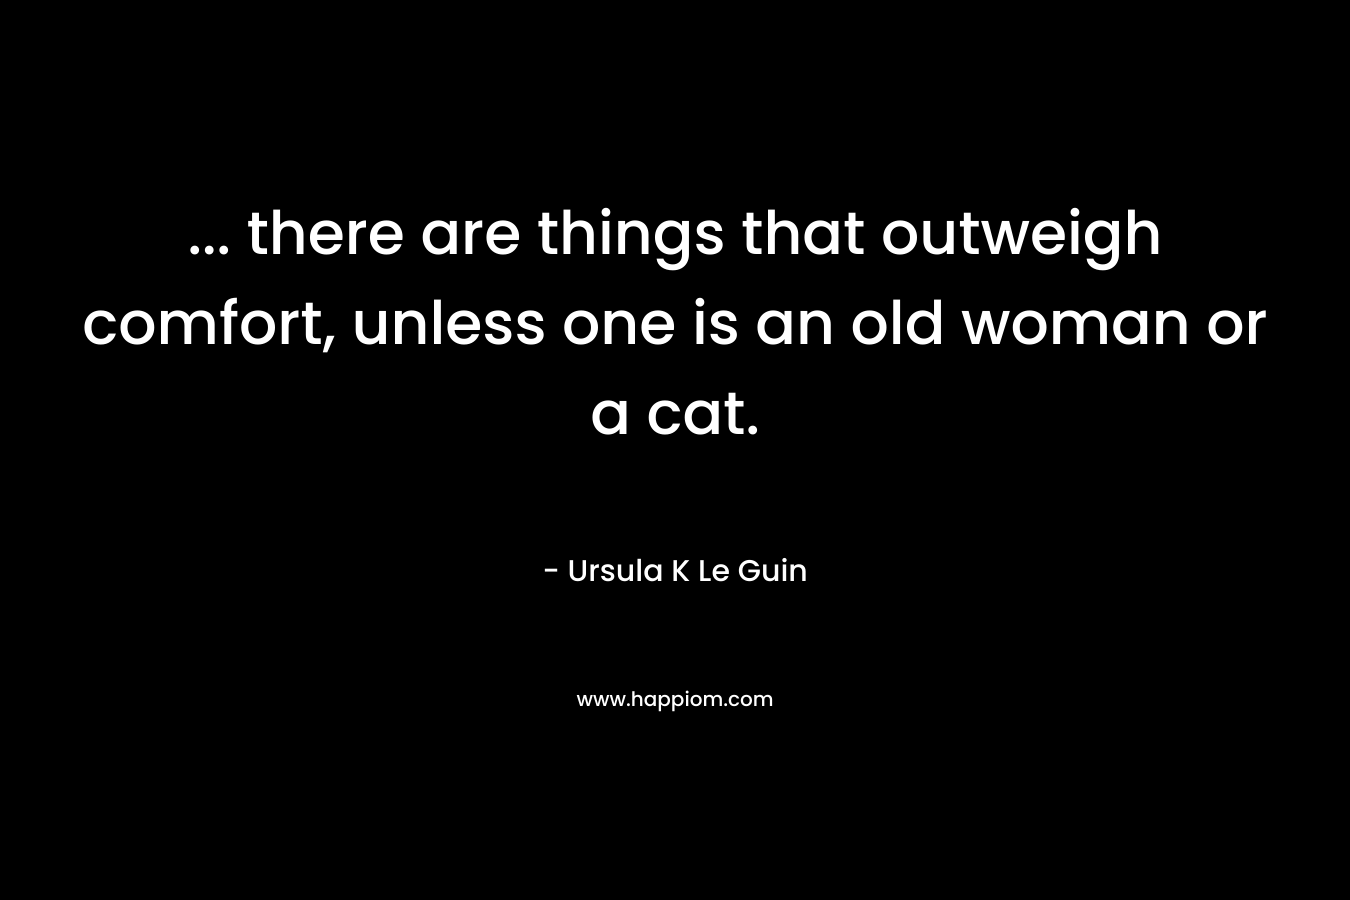 ... there are things that outweigh comfort, unless one is an old woman or a cat.